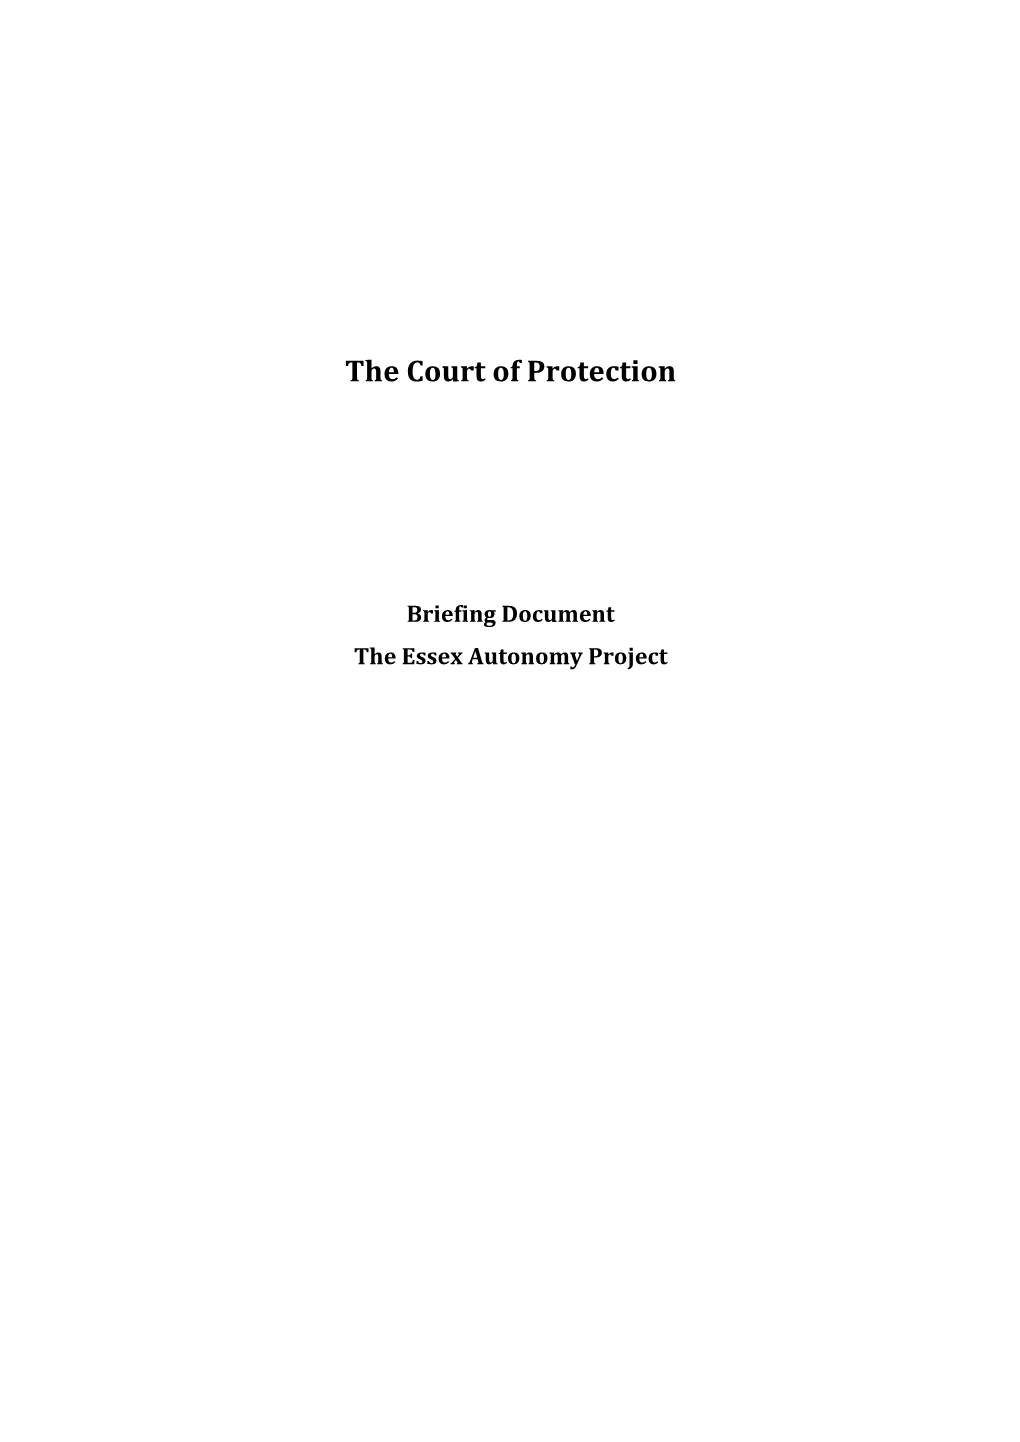 The Court of Protection